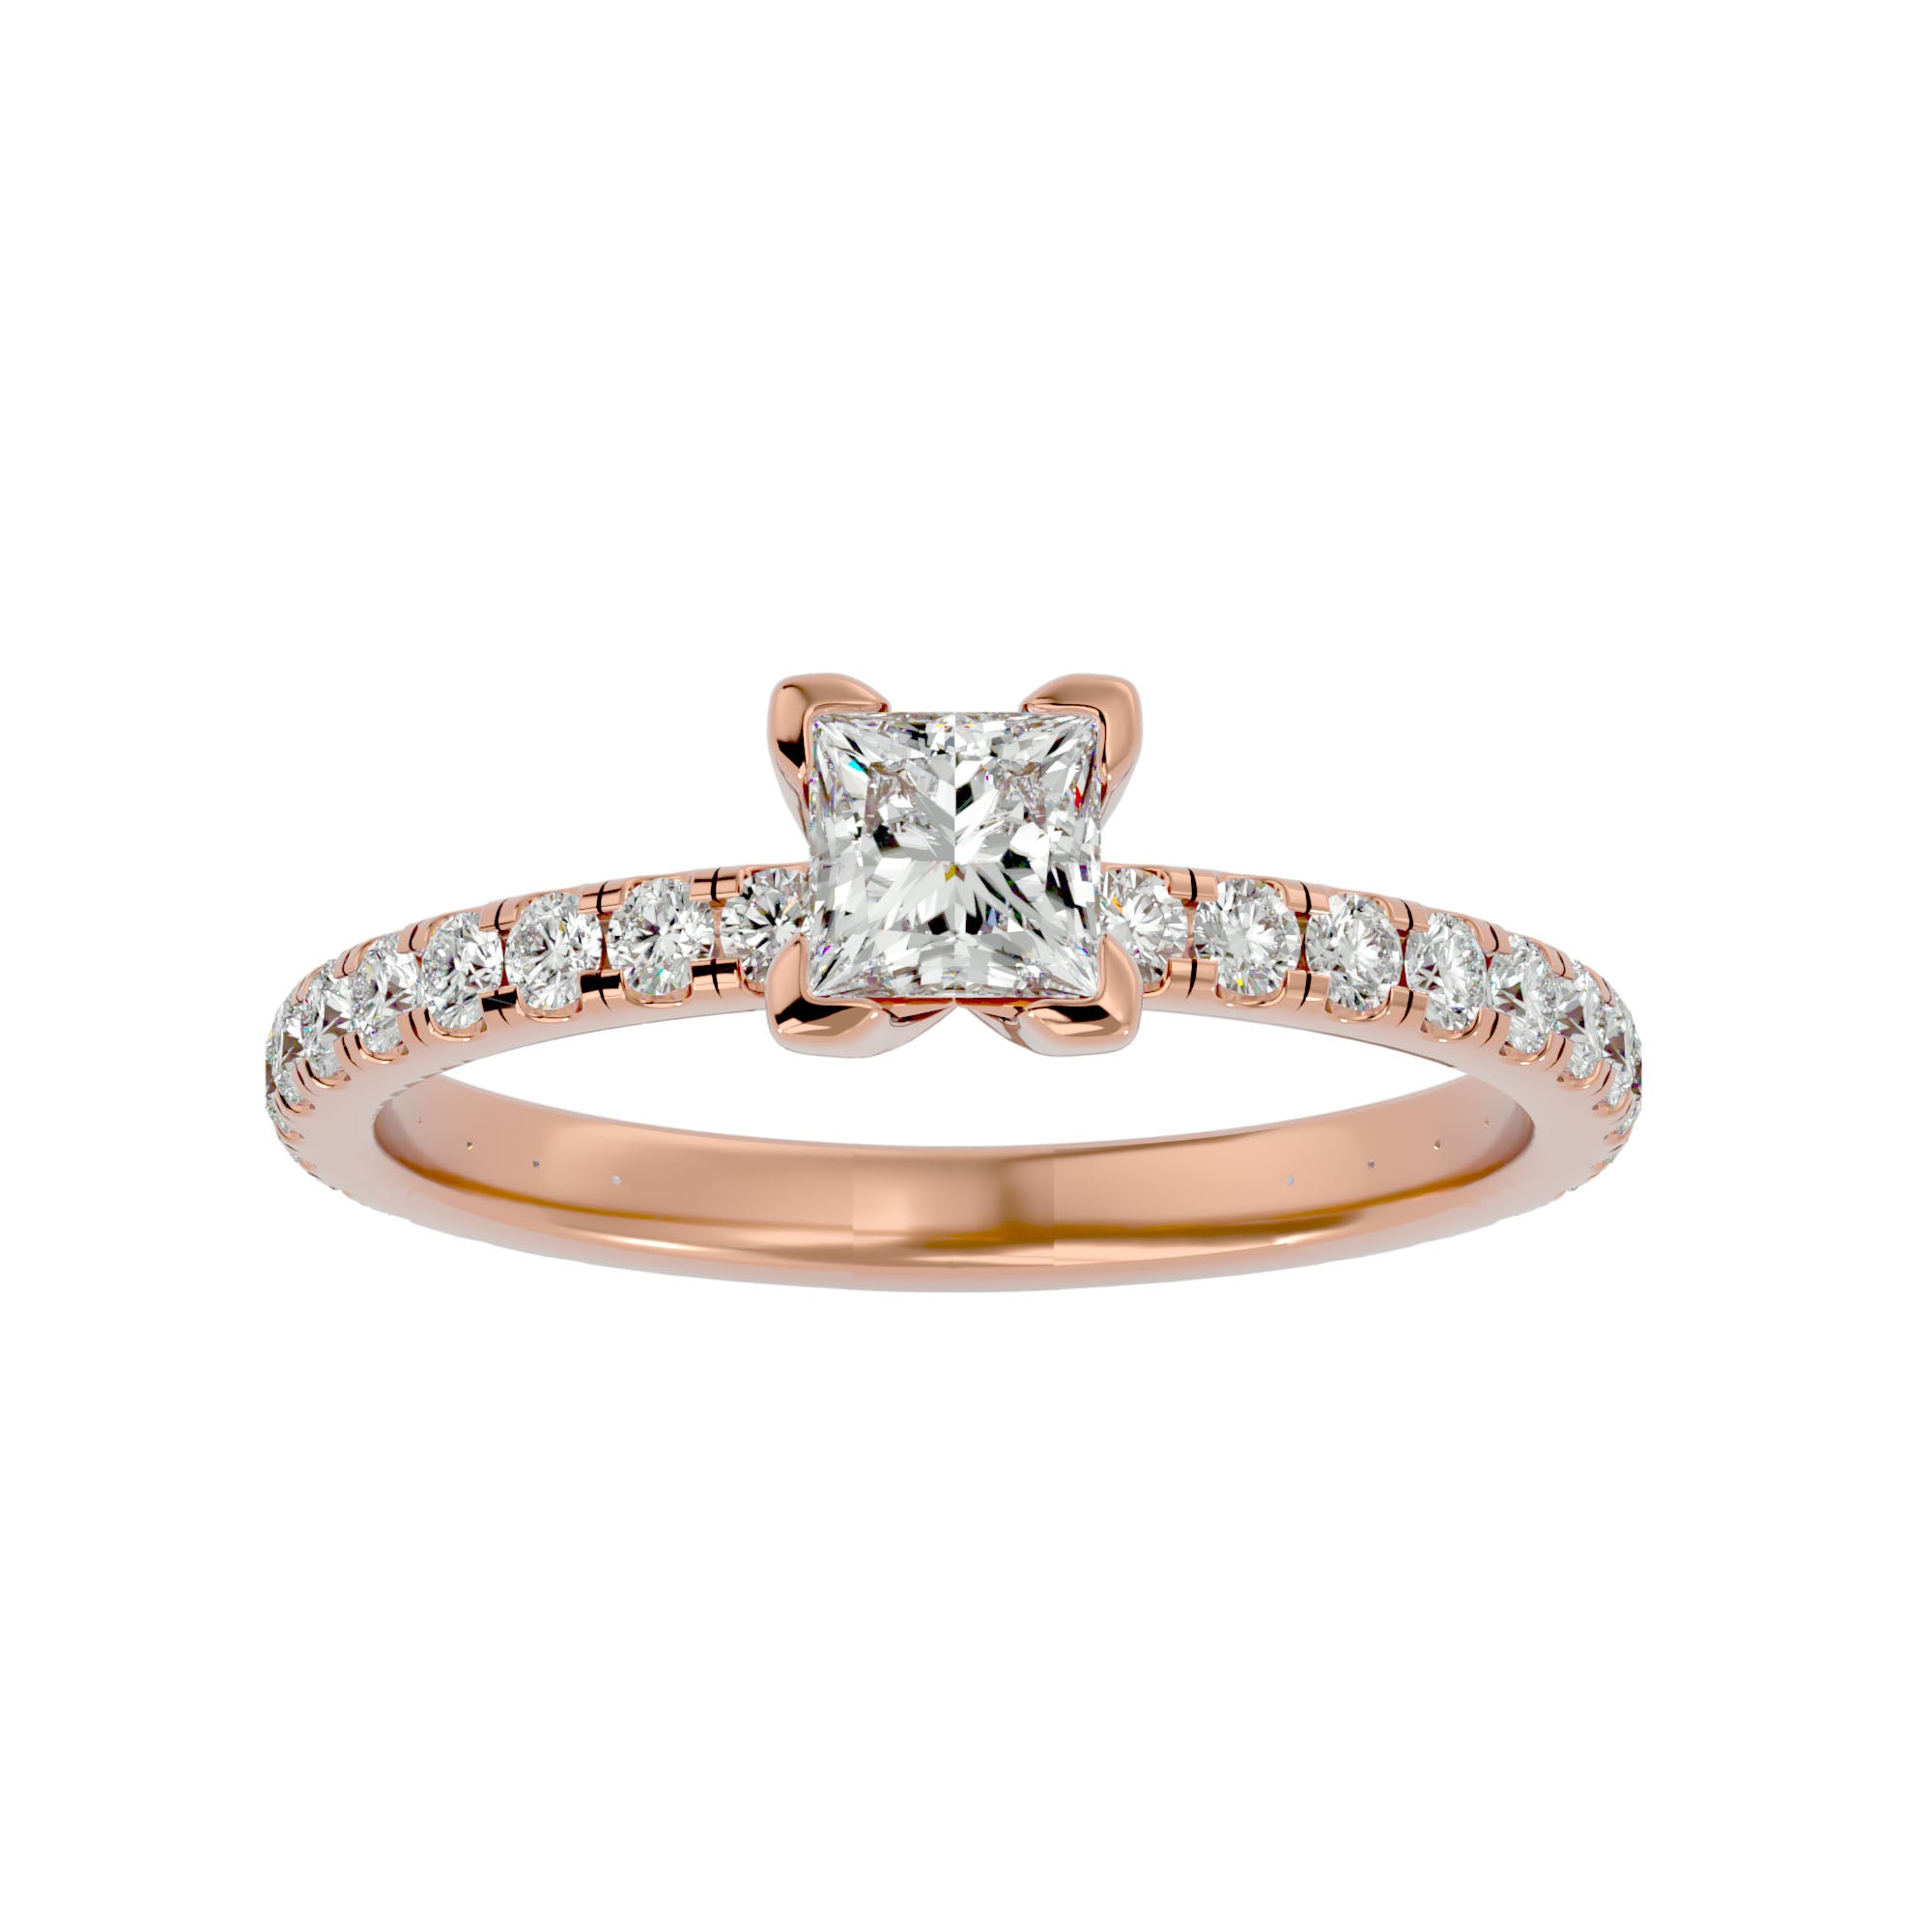 HOH Horace Diamond Solitaire Ring